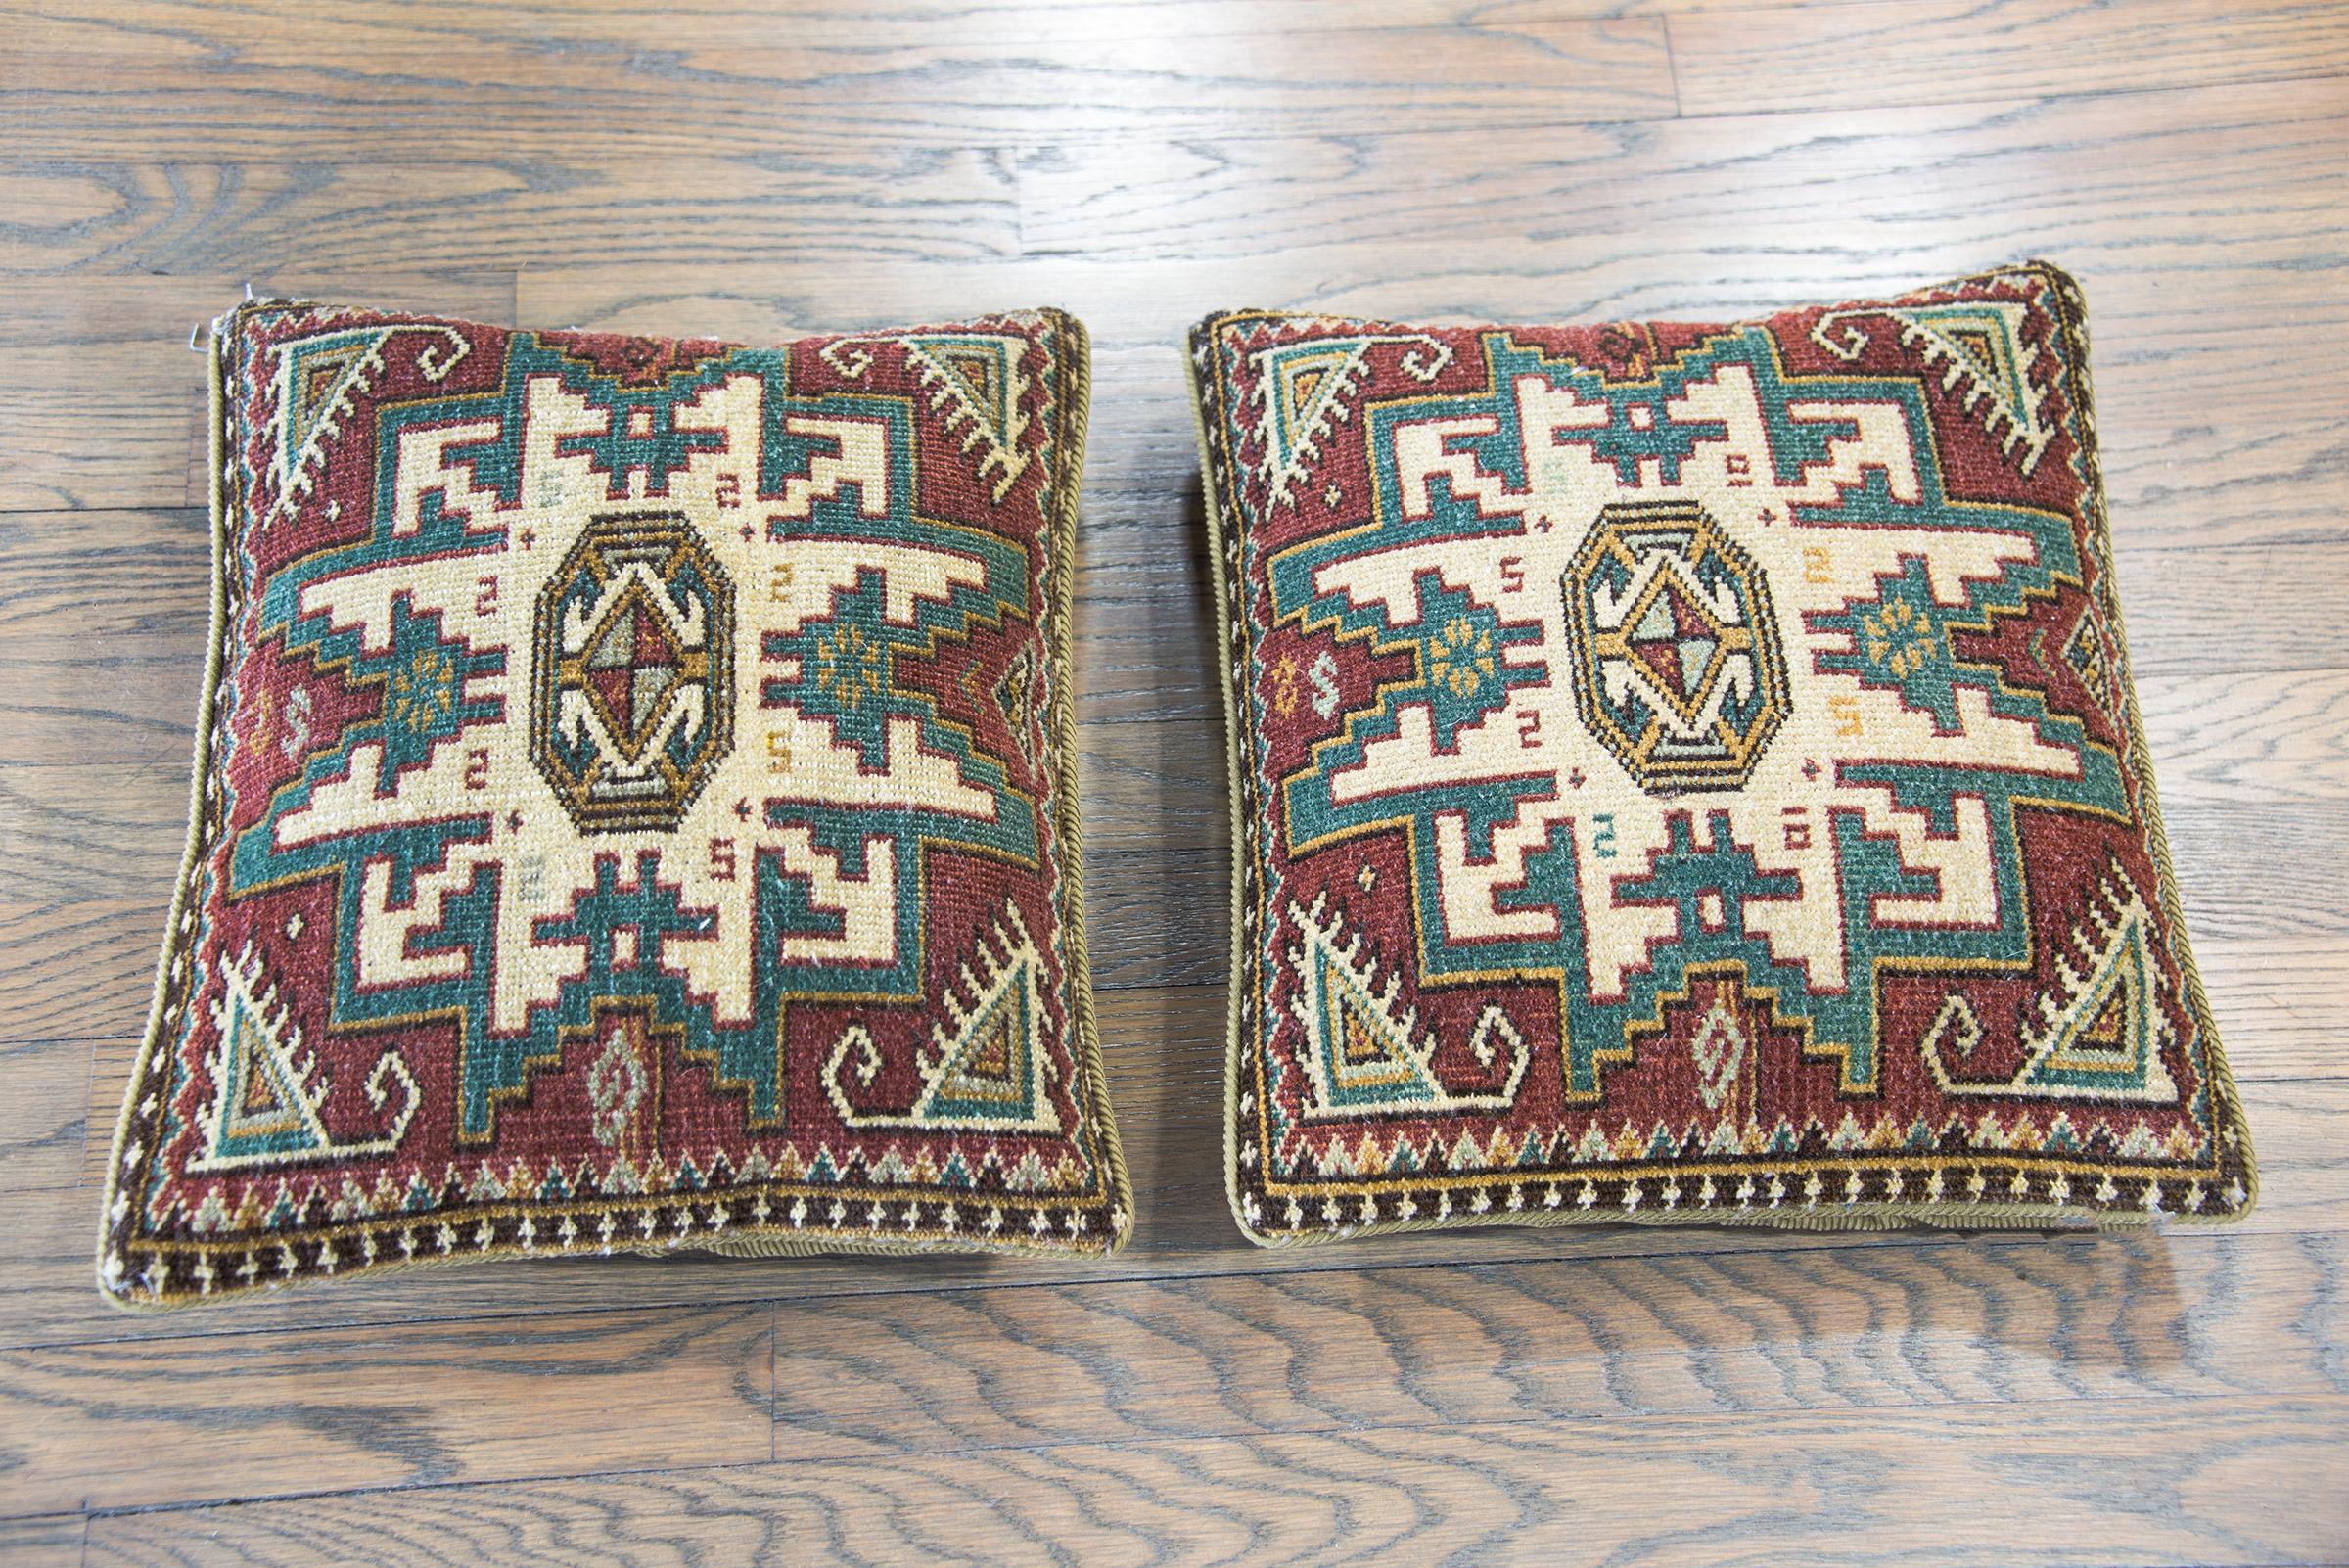 A pair of pillows made from a vintage Turkish rug, each with two large stylized floral medallions and simple geometric patterned borders.